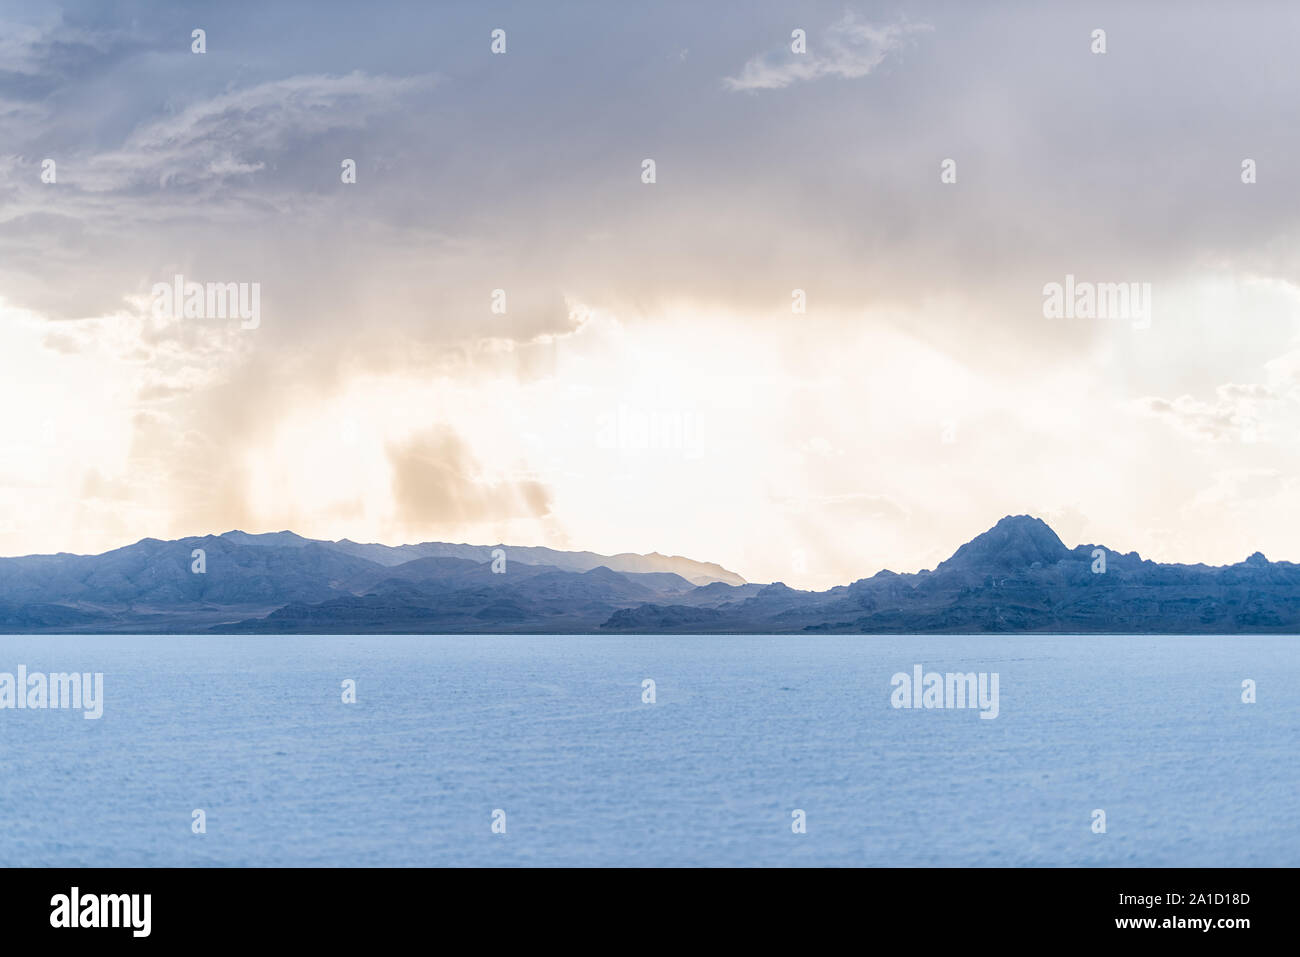 Bonneville Salt Flats and storm clouds near Salt Lake City, Utah and mountain view during sunset with nobody Stock Photo